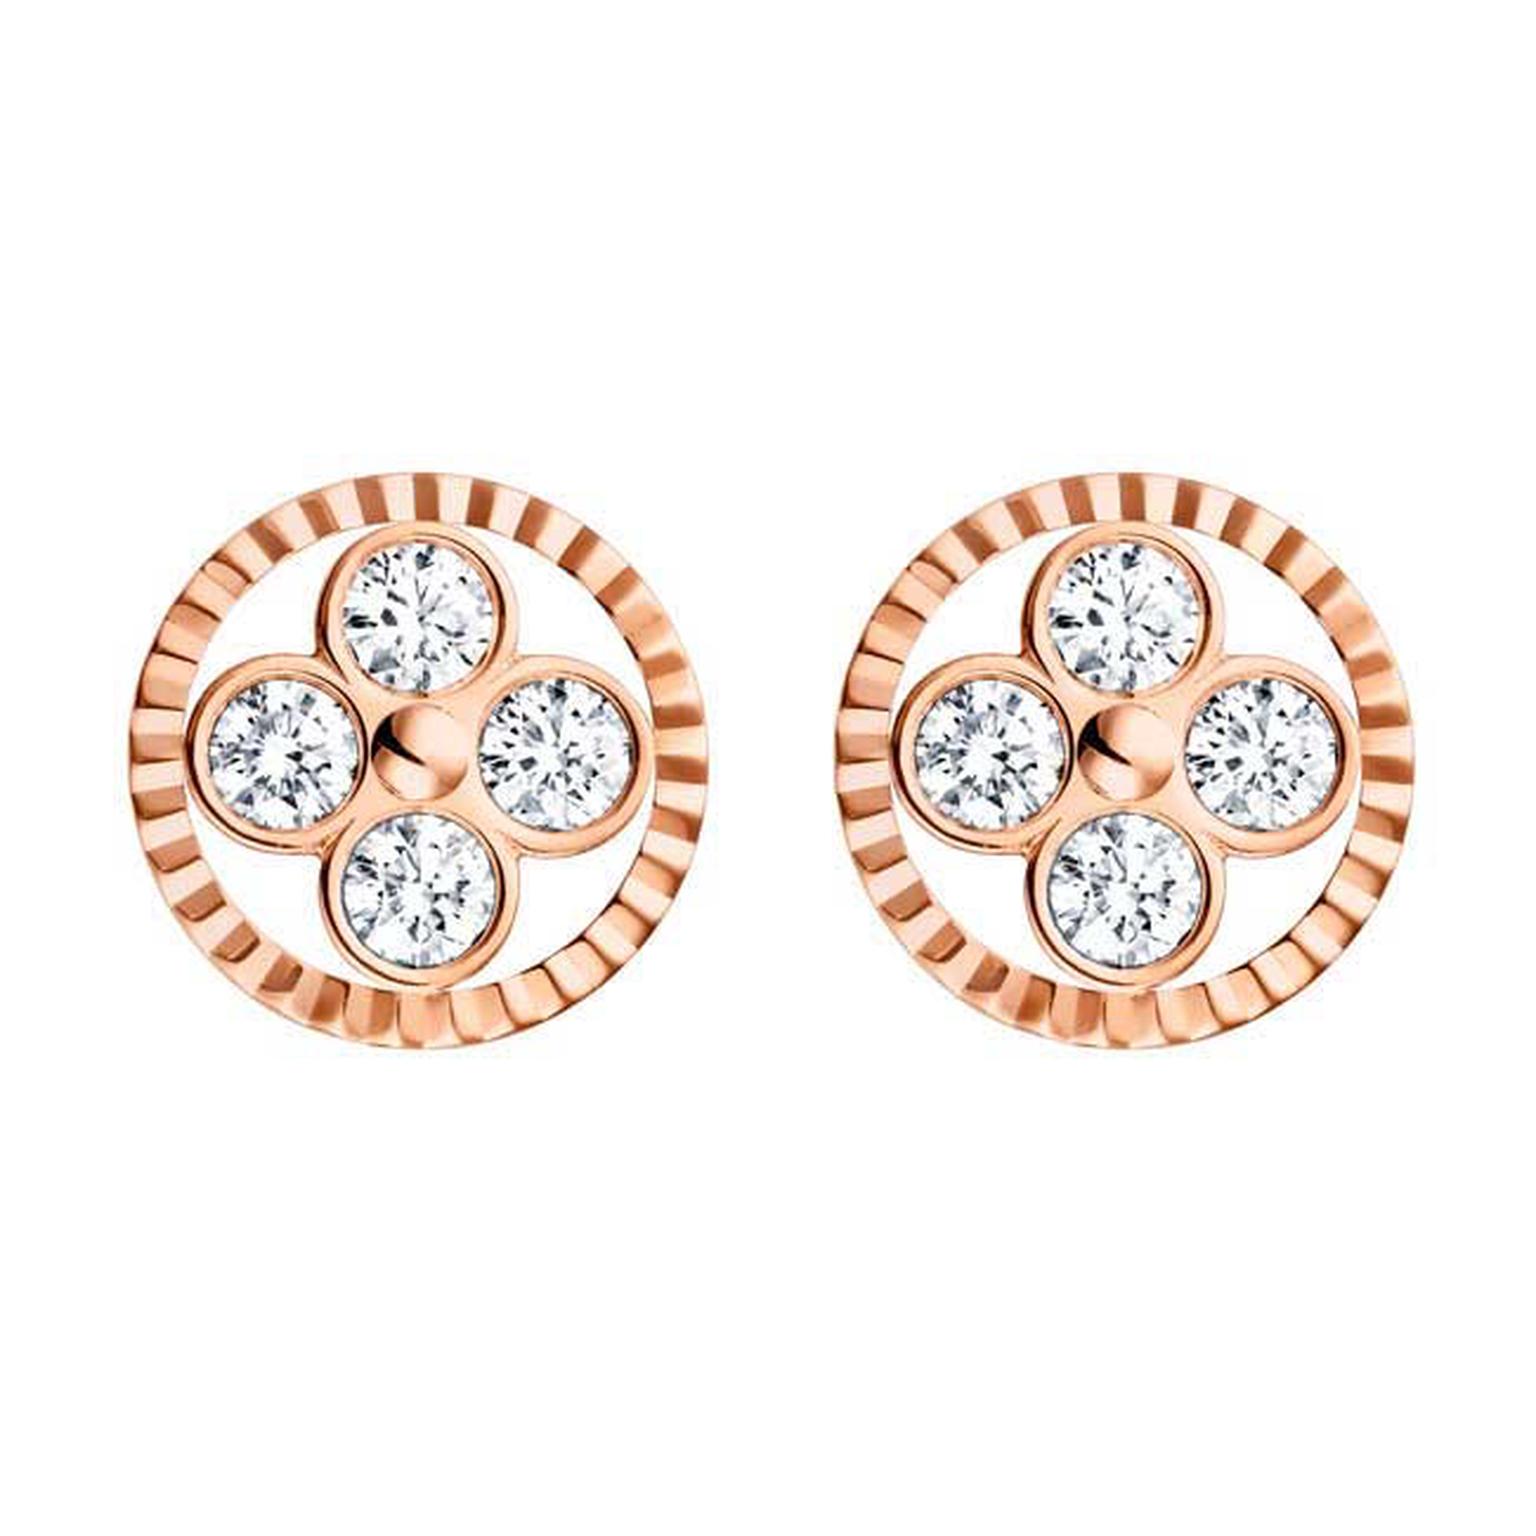 Louis Vuitton Monogram Sun and Stars collection Sun earrings in rose gold_main